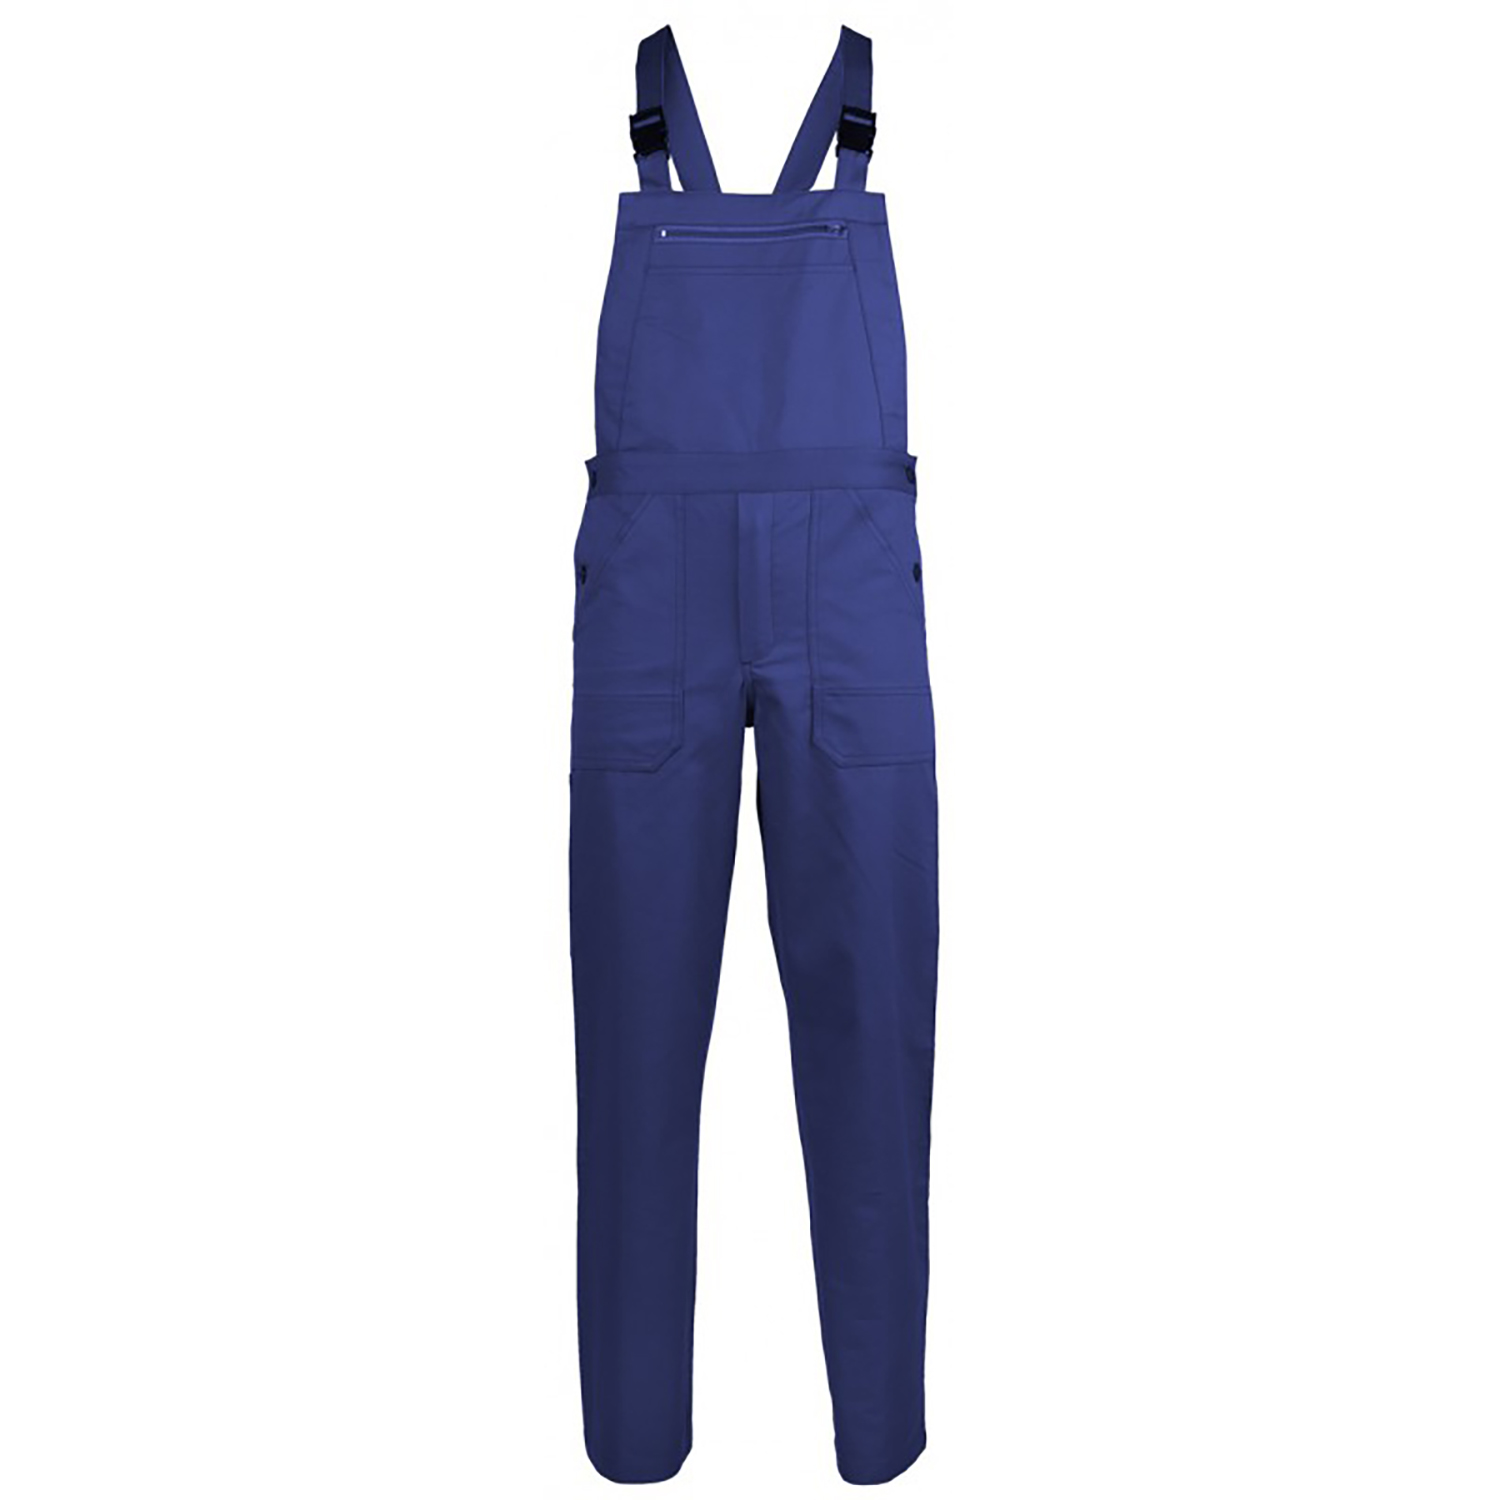 Workwear Trousers with Shoulder Straps